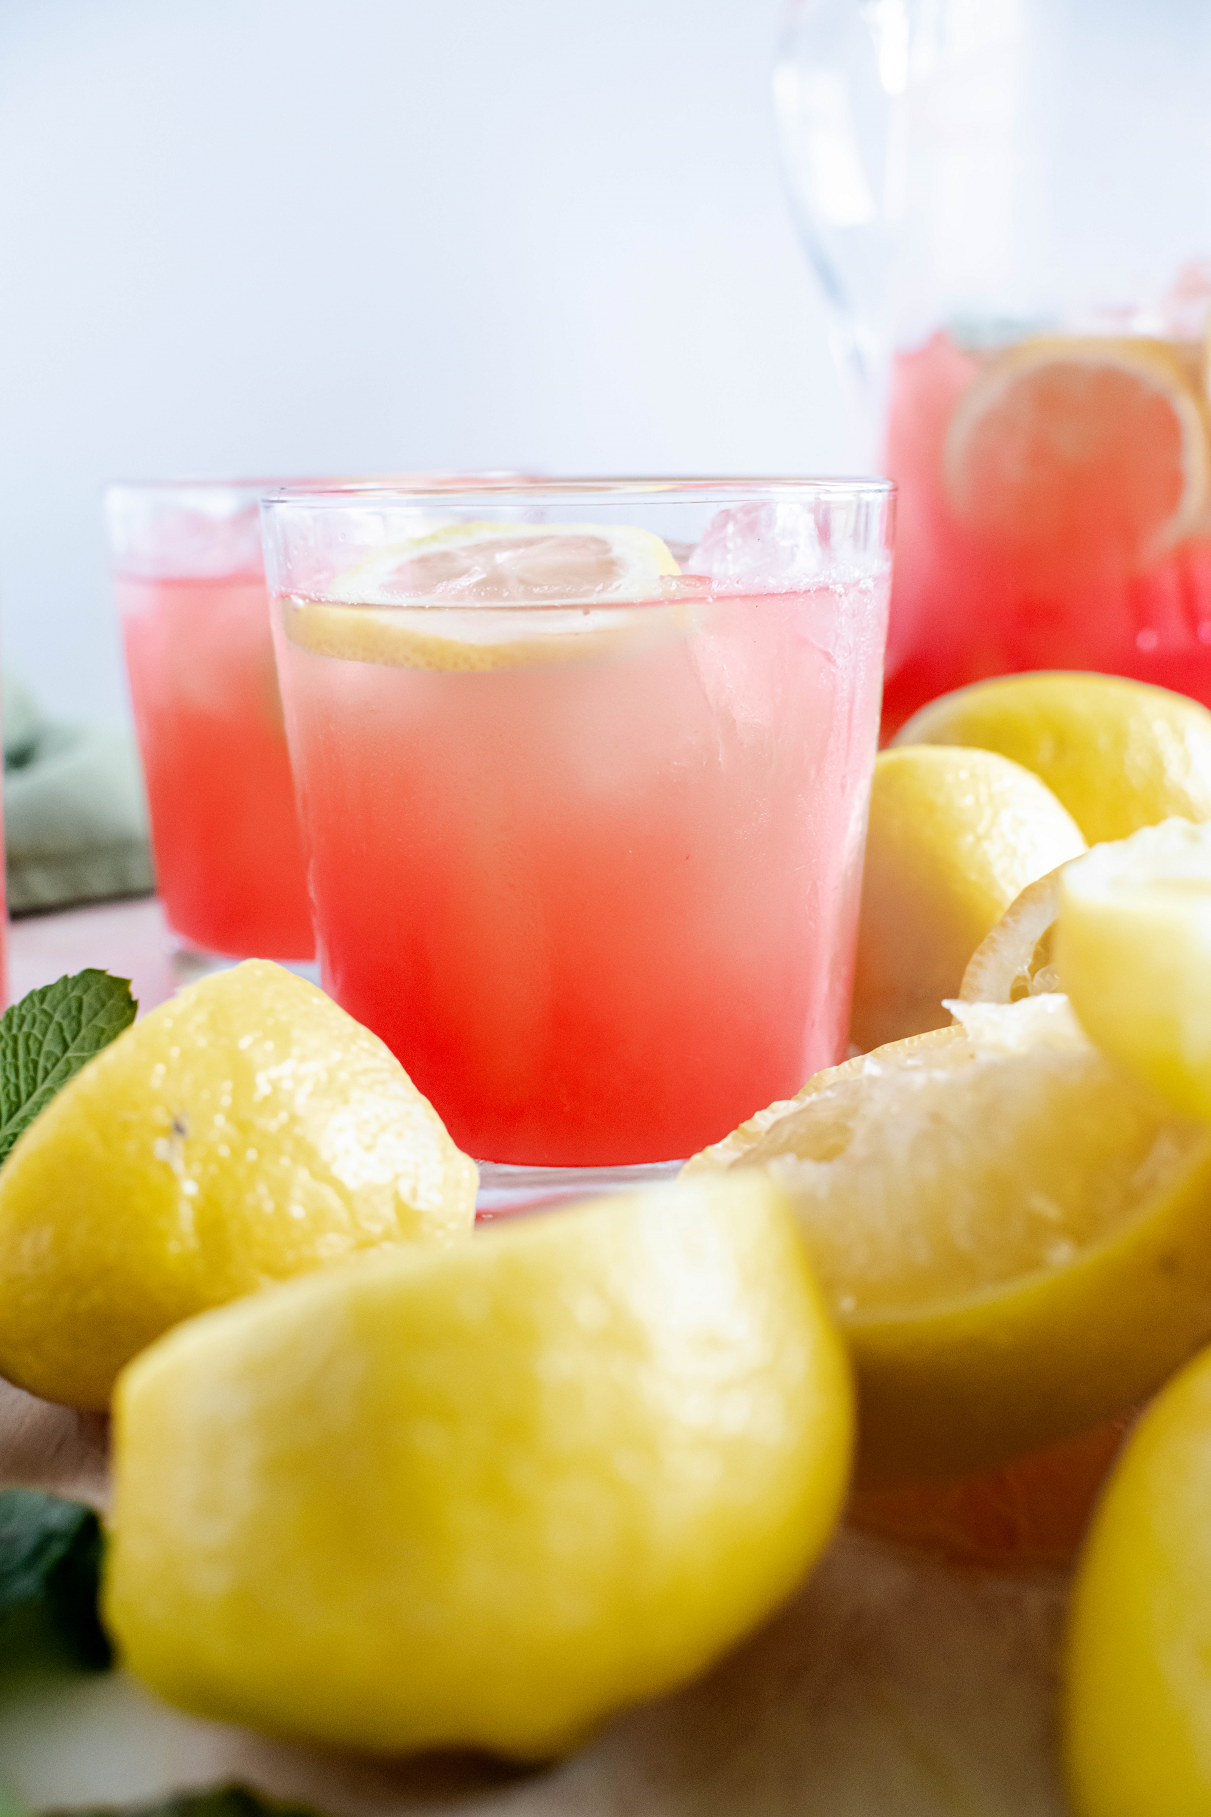 Cool off this summer with this super refreshing Watermelon Mint Lemonade. Easy to make and perfect for sipping.